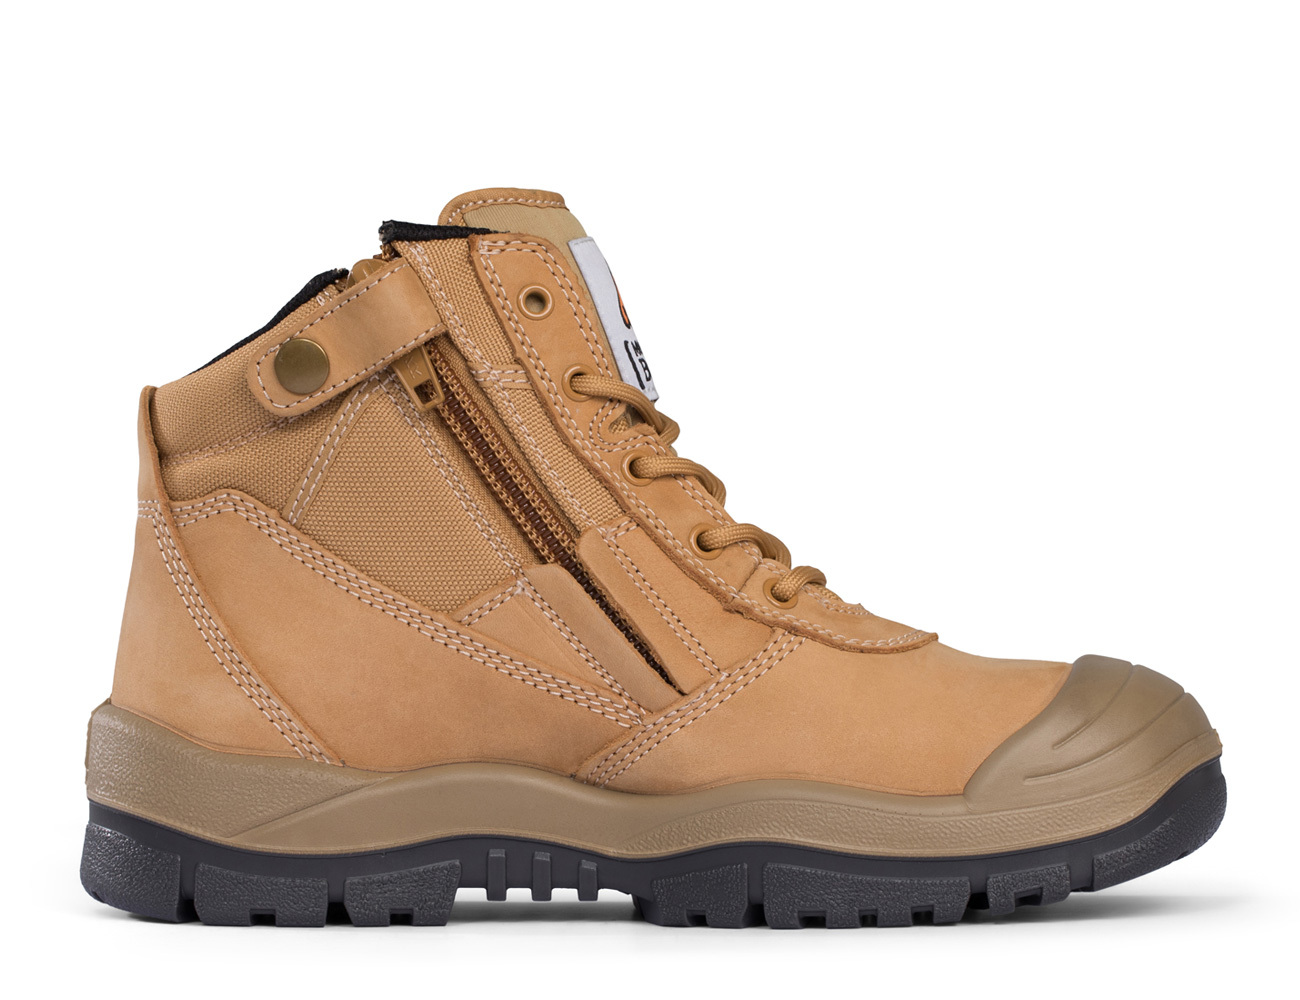 Mongrel ZipSider Safety Boot with Scuff Cap Wheat Size AU/UK 5 (US 6)